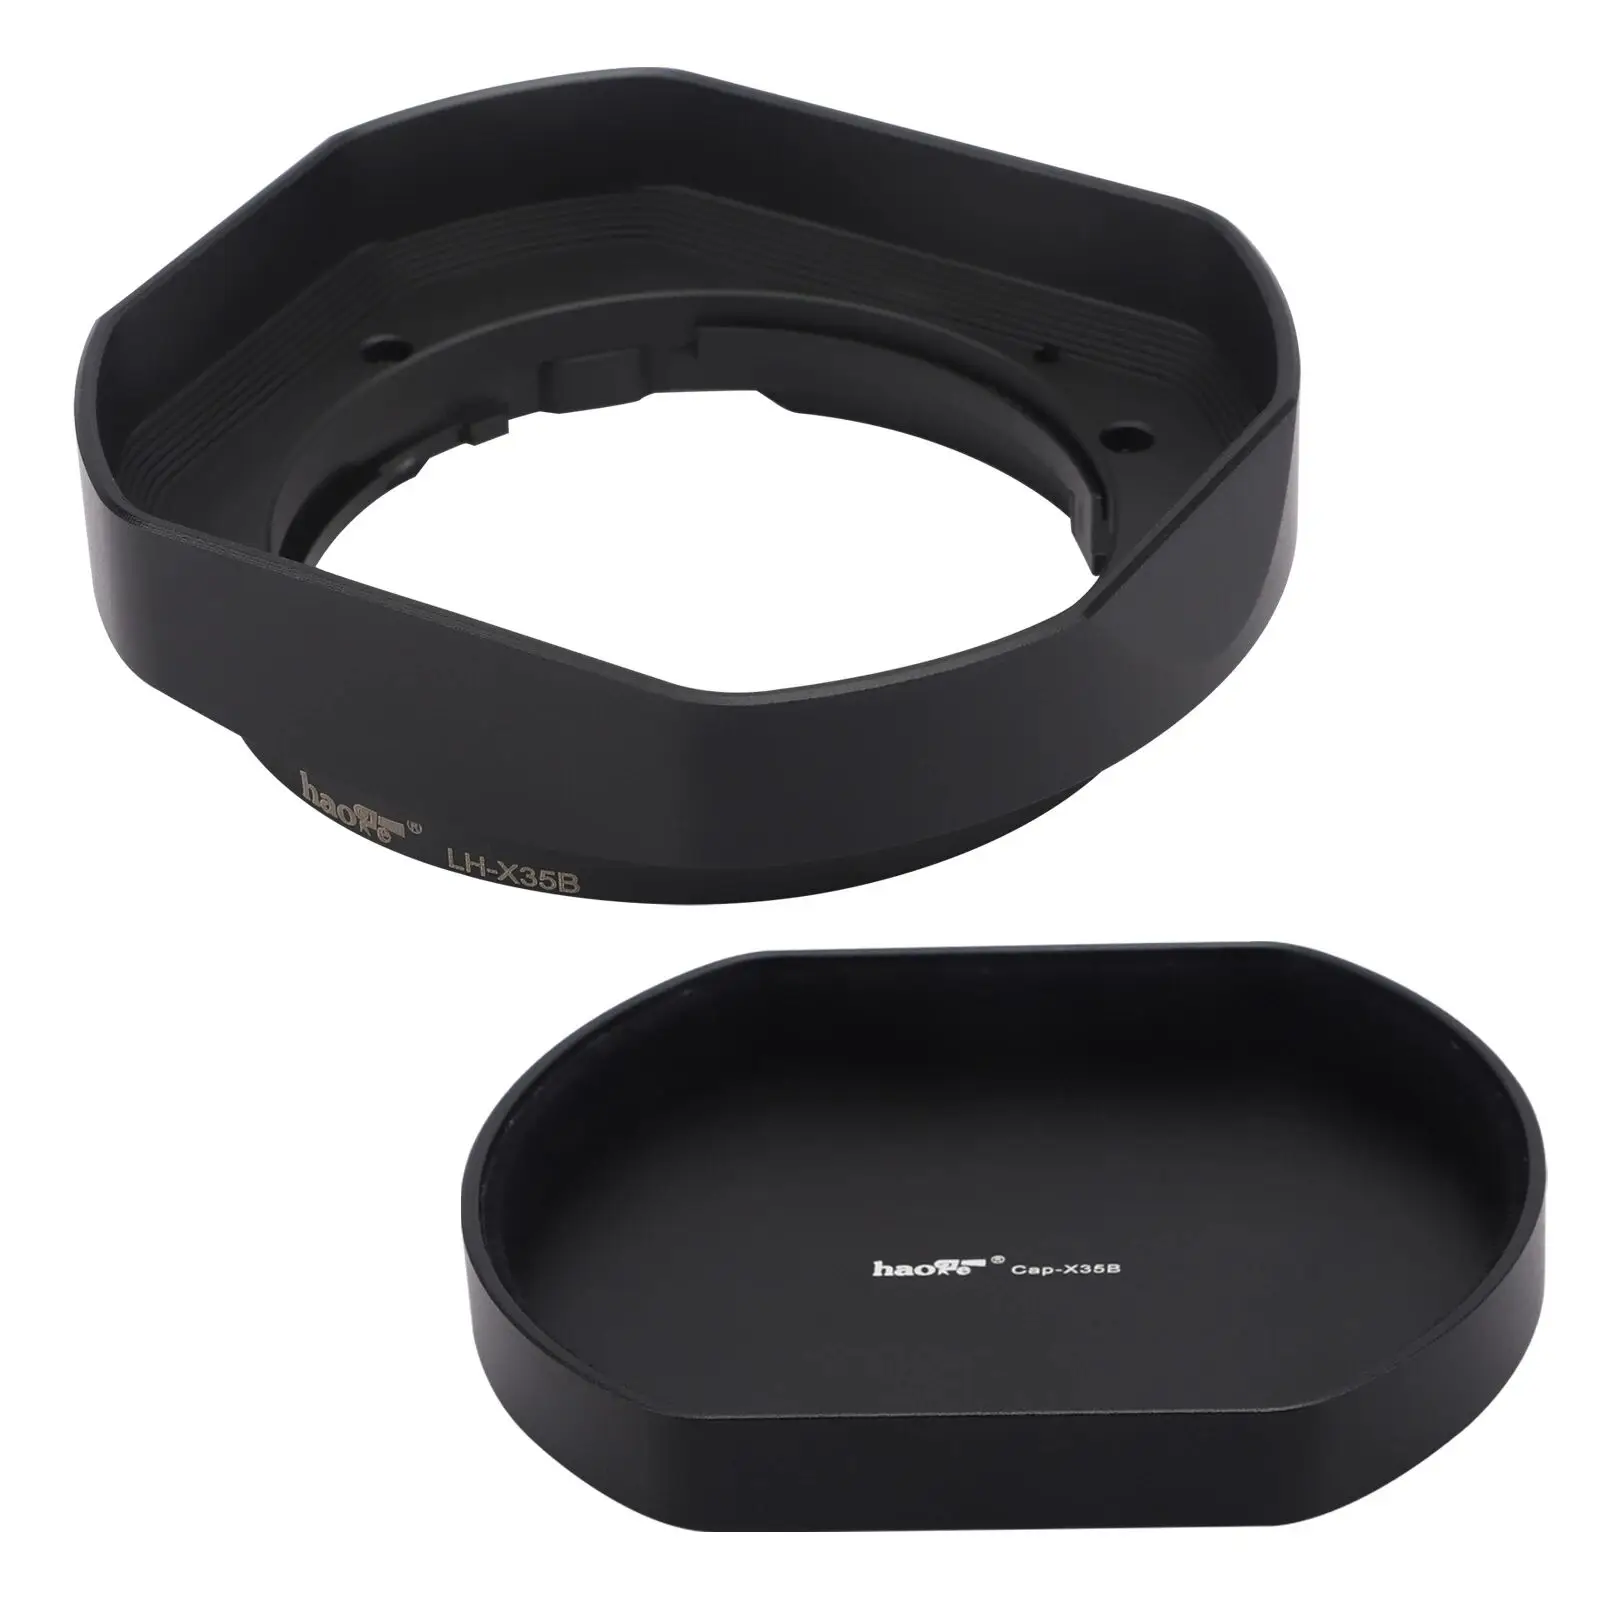 

Haoge LH-X35B Square Metal Lens Hood With Metal Cap Is Designed for Fujifilm XF 23mm F2 R WR And Fujifilm XF 35mm F2 R WR Lens